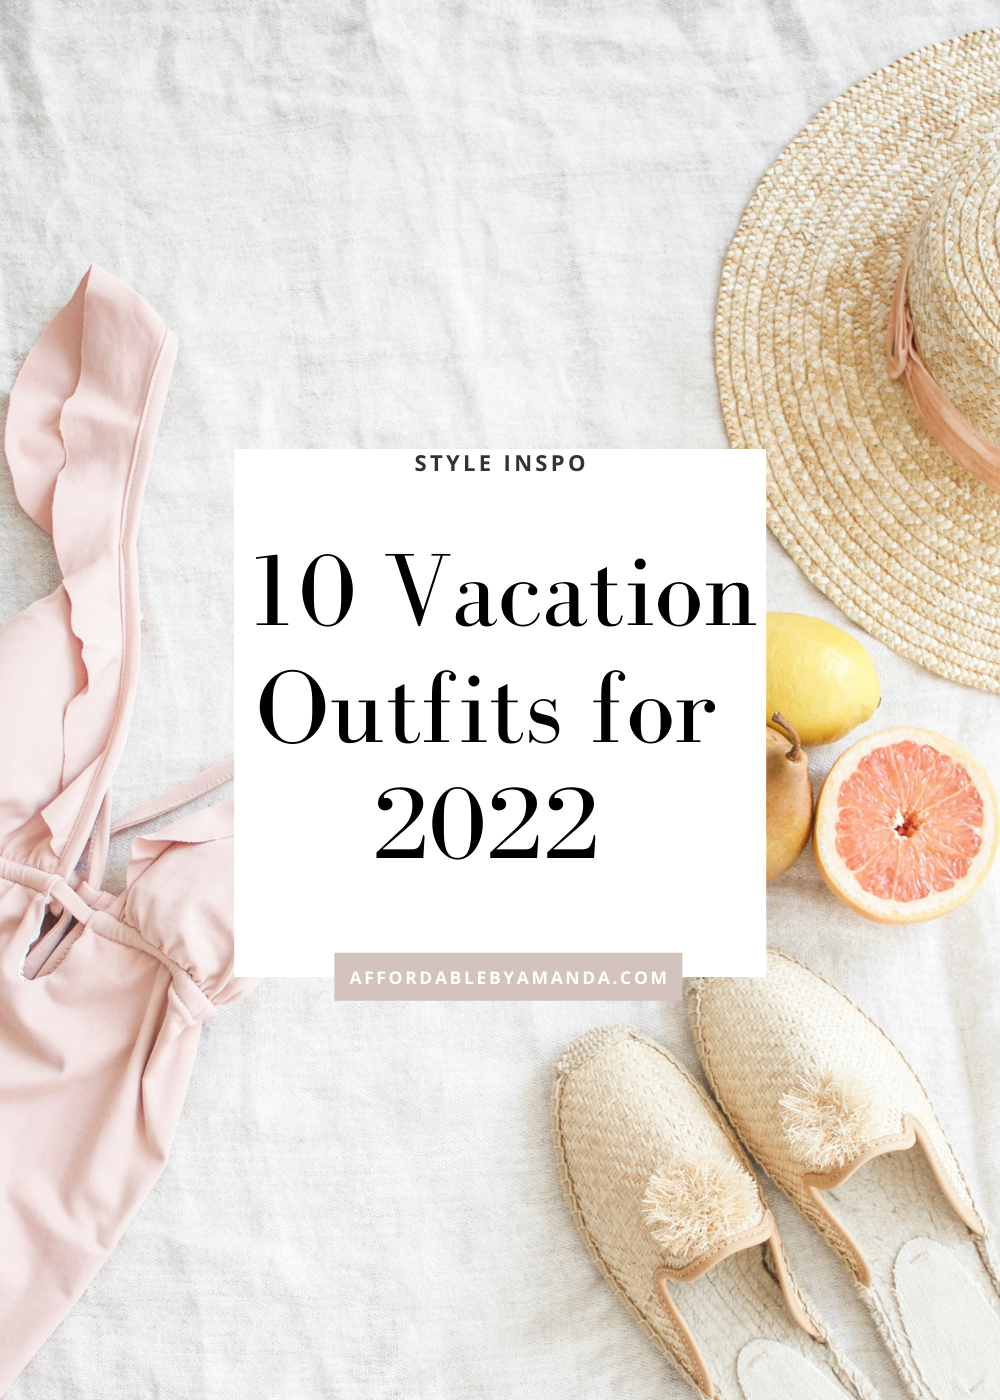 10 Vacation Outfits for 2022 - Affordable by Amanda